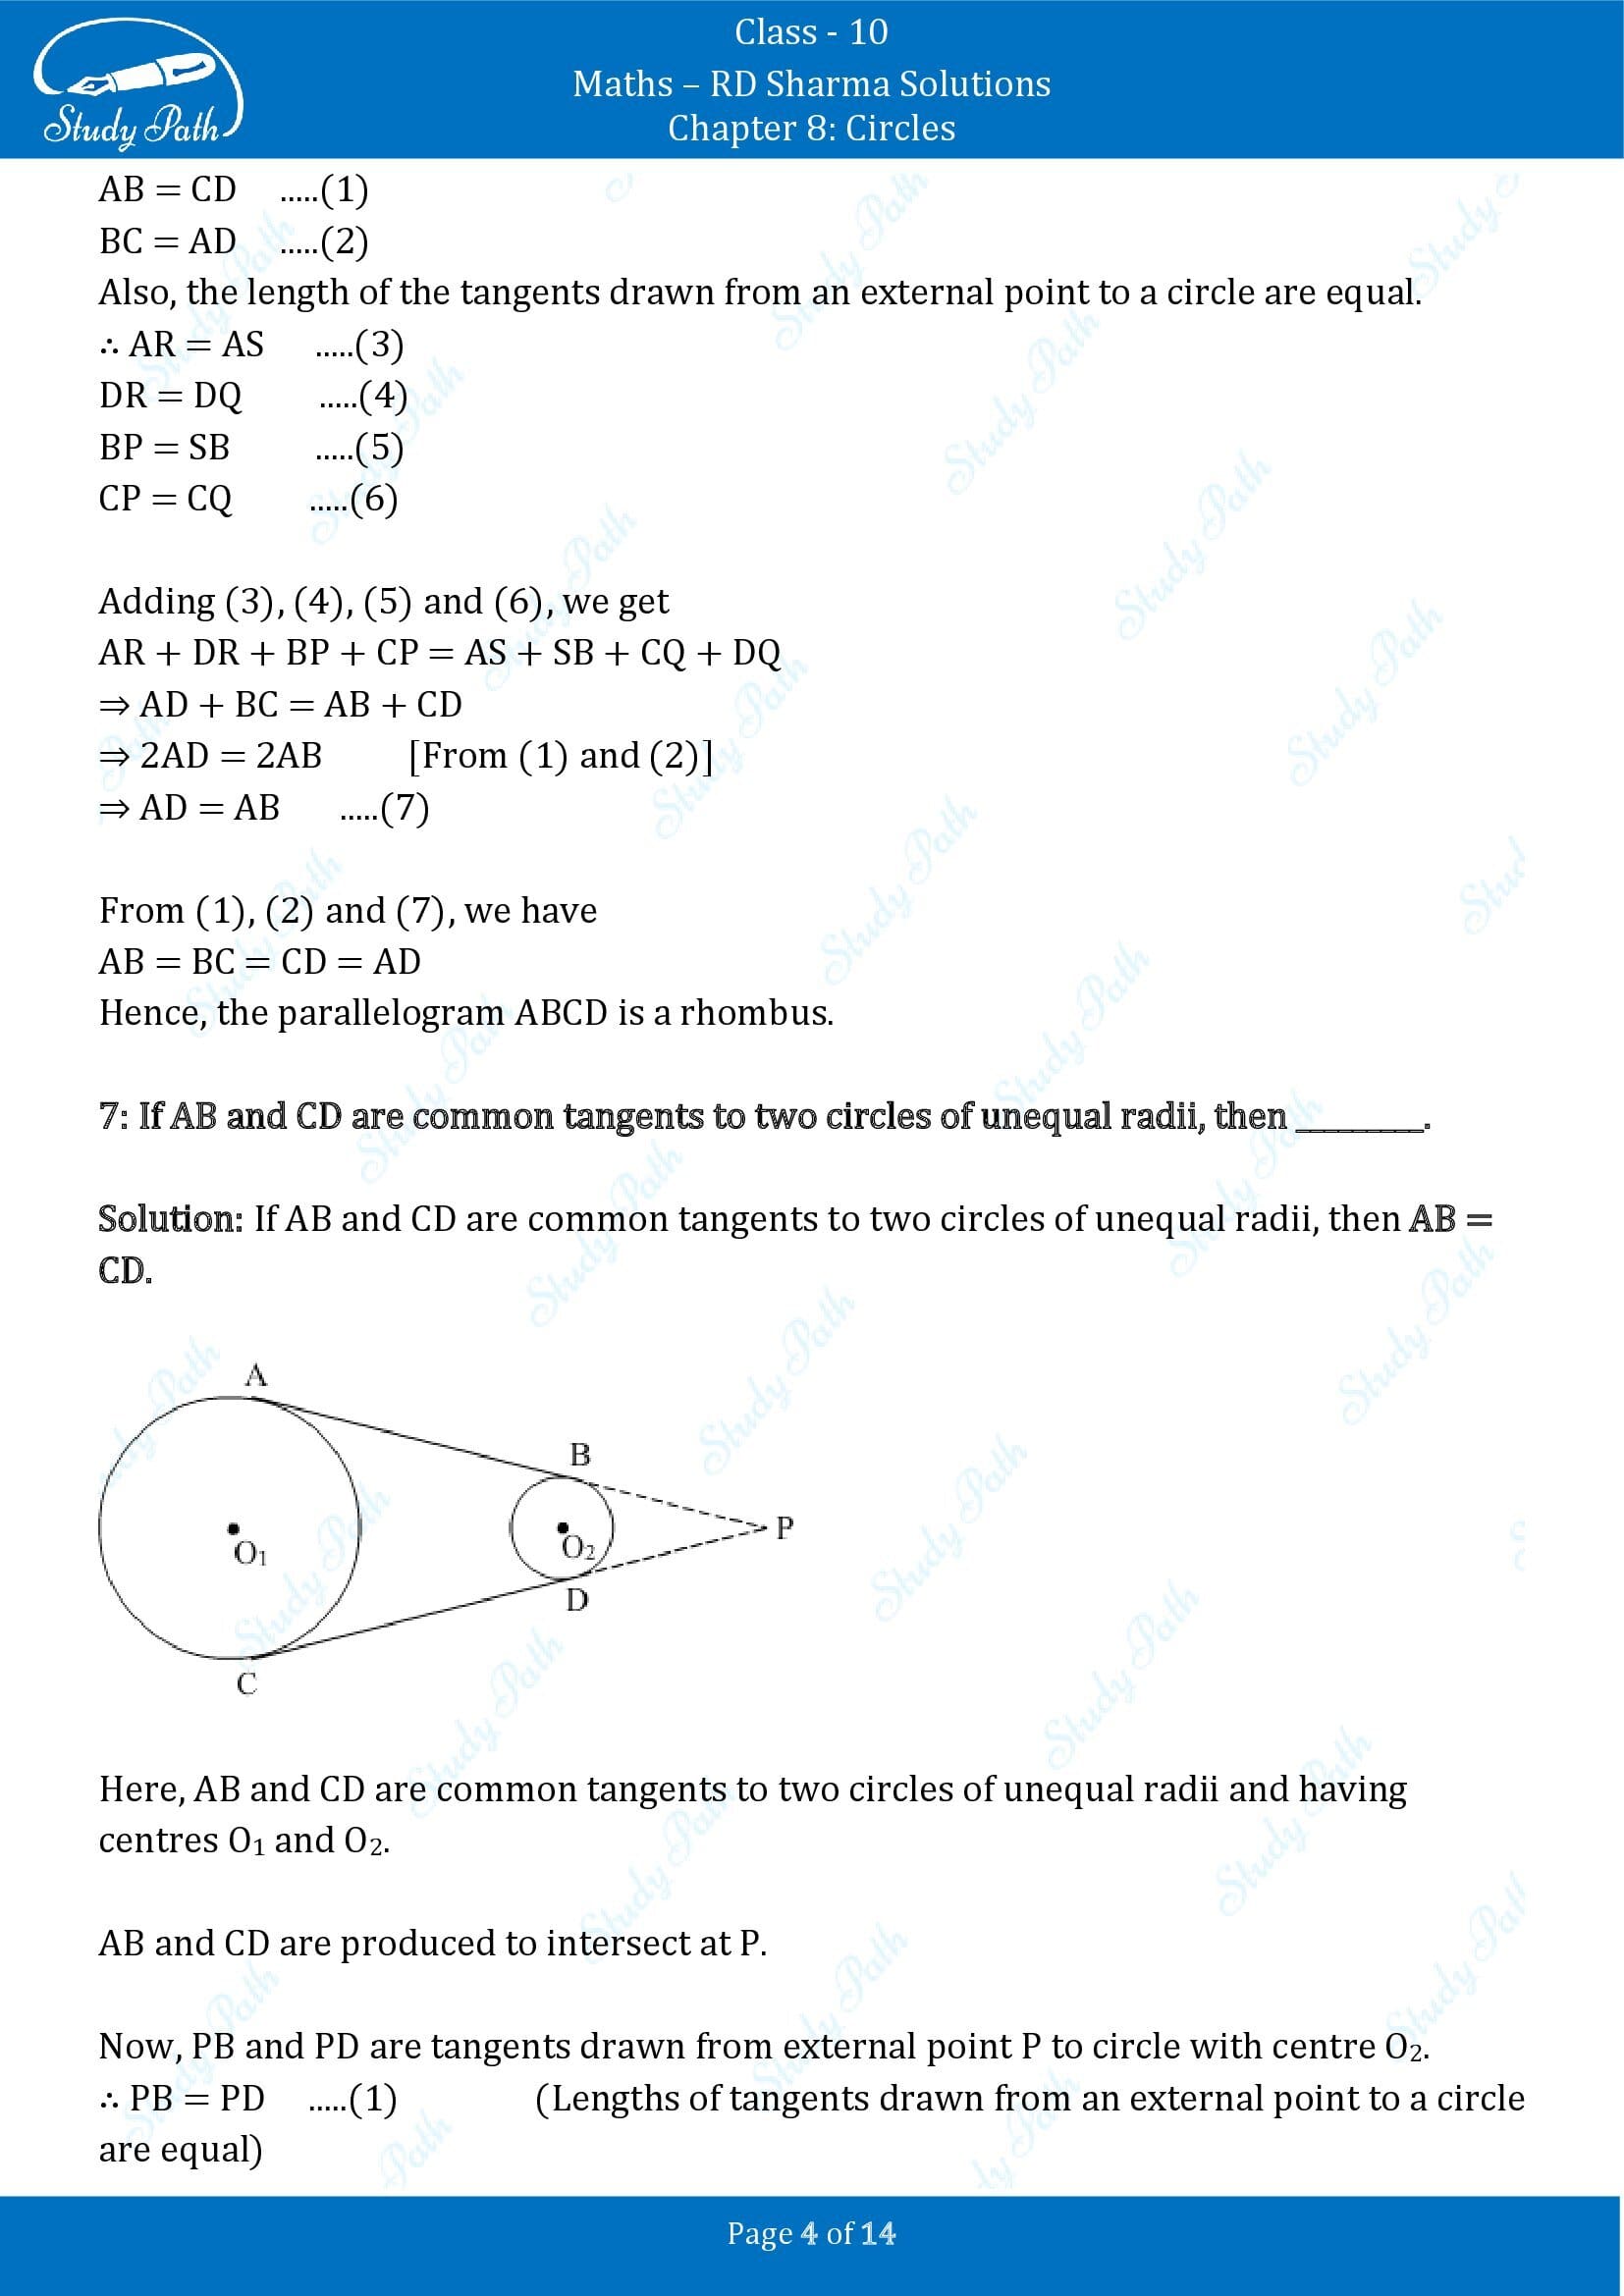 RD Sharma Solutions Class 10 Chapter 8 Circles Fill in the Blank Type Questions FBQs 00004